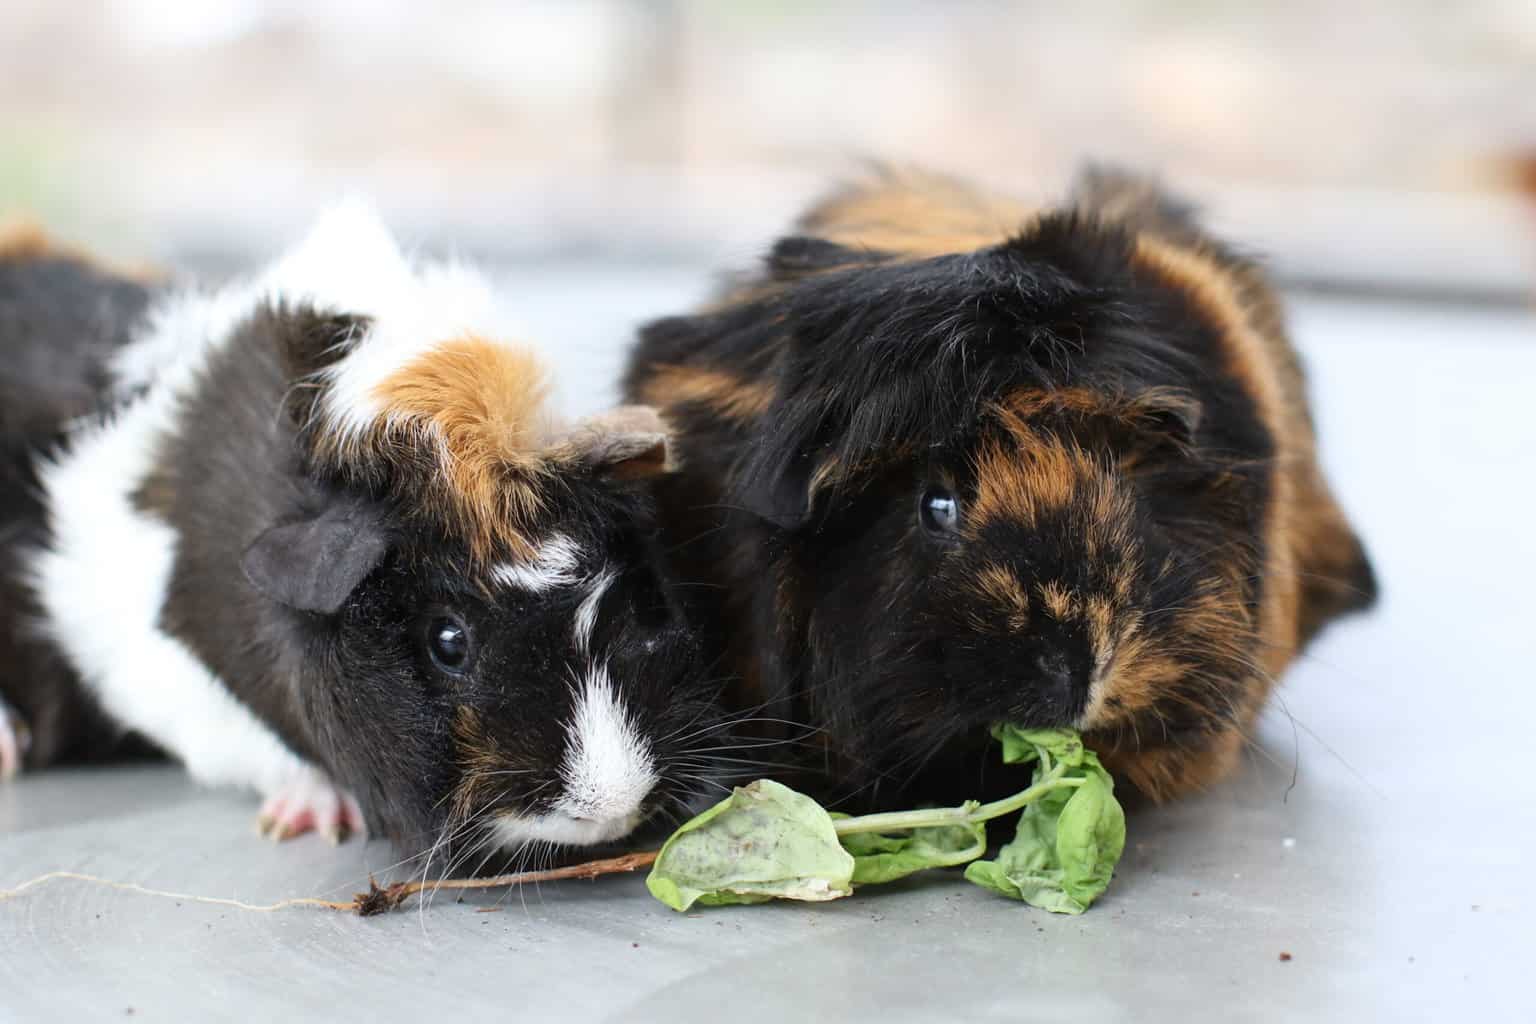 Two guinea pigs eating green leaves placed on a surface in the kitchen area of the house